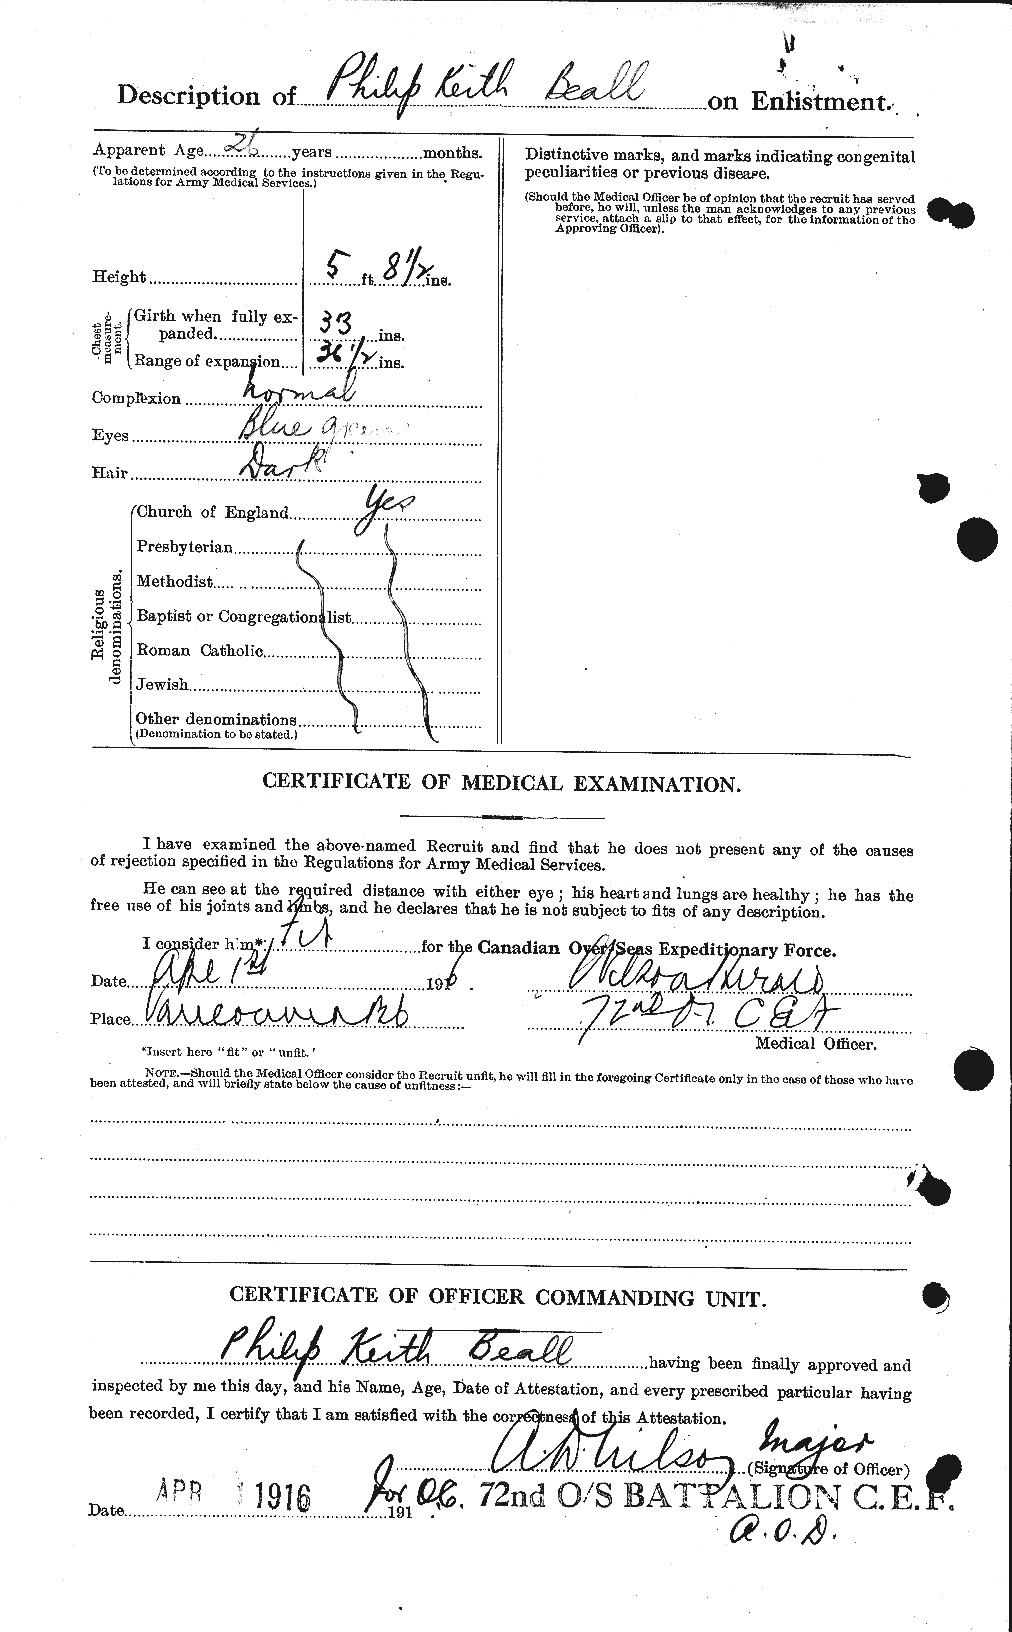 Personnel Records of the First World War - CEF 235383b